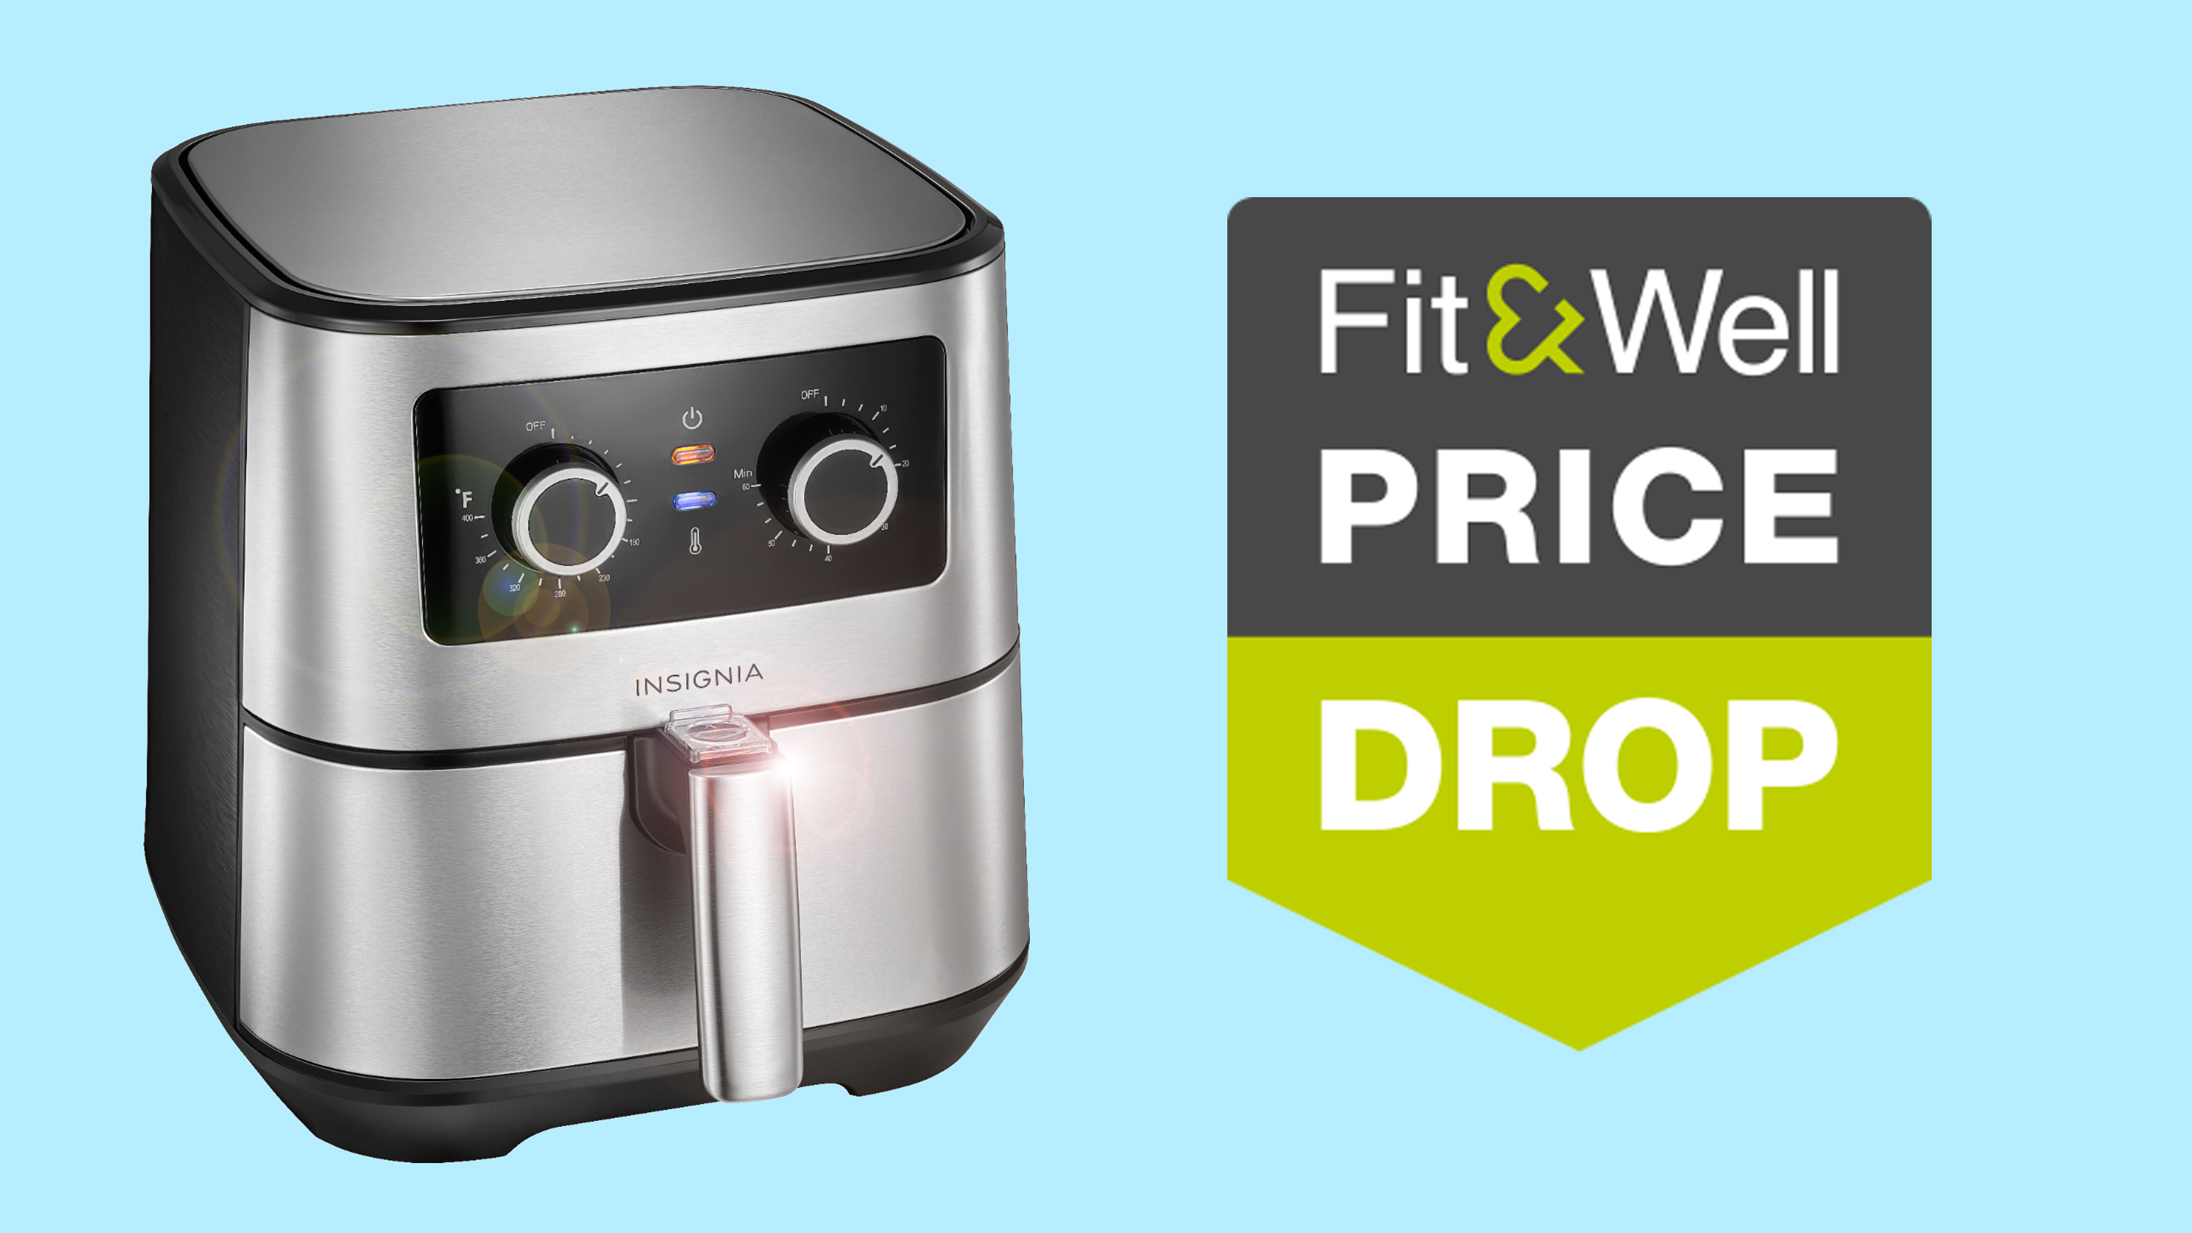 Upgrade Your Cooking with This 5-Quart Digital Insignia Air Fryer - Now 50%  Off at Best Buy